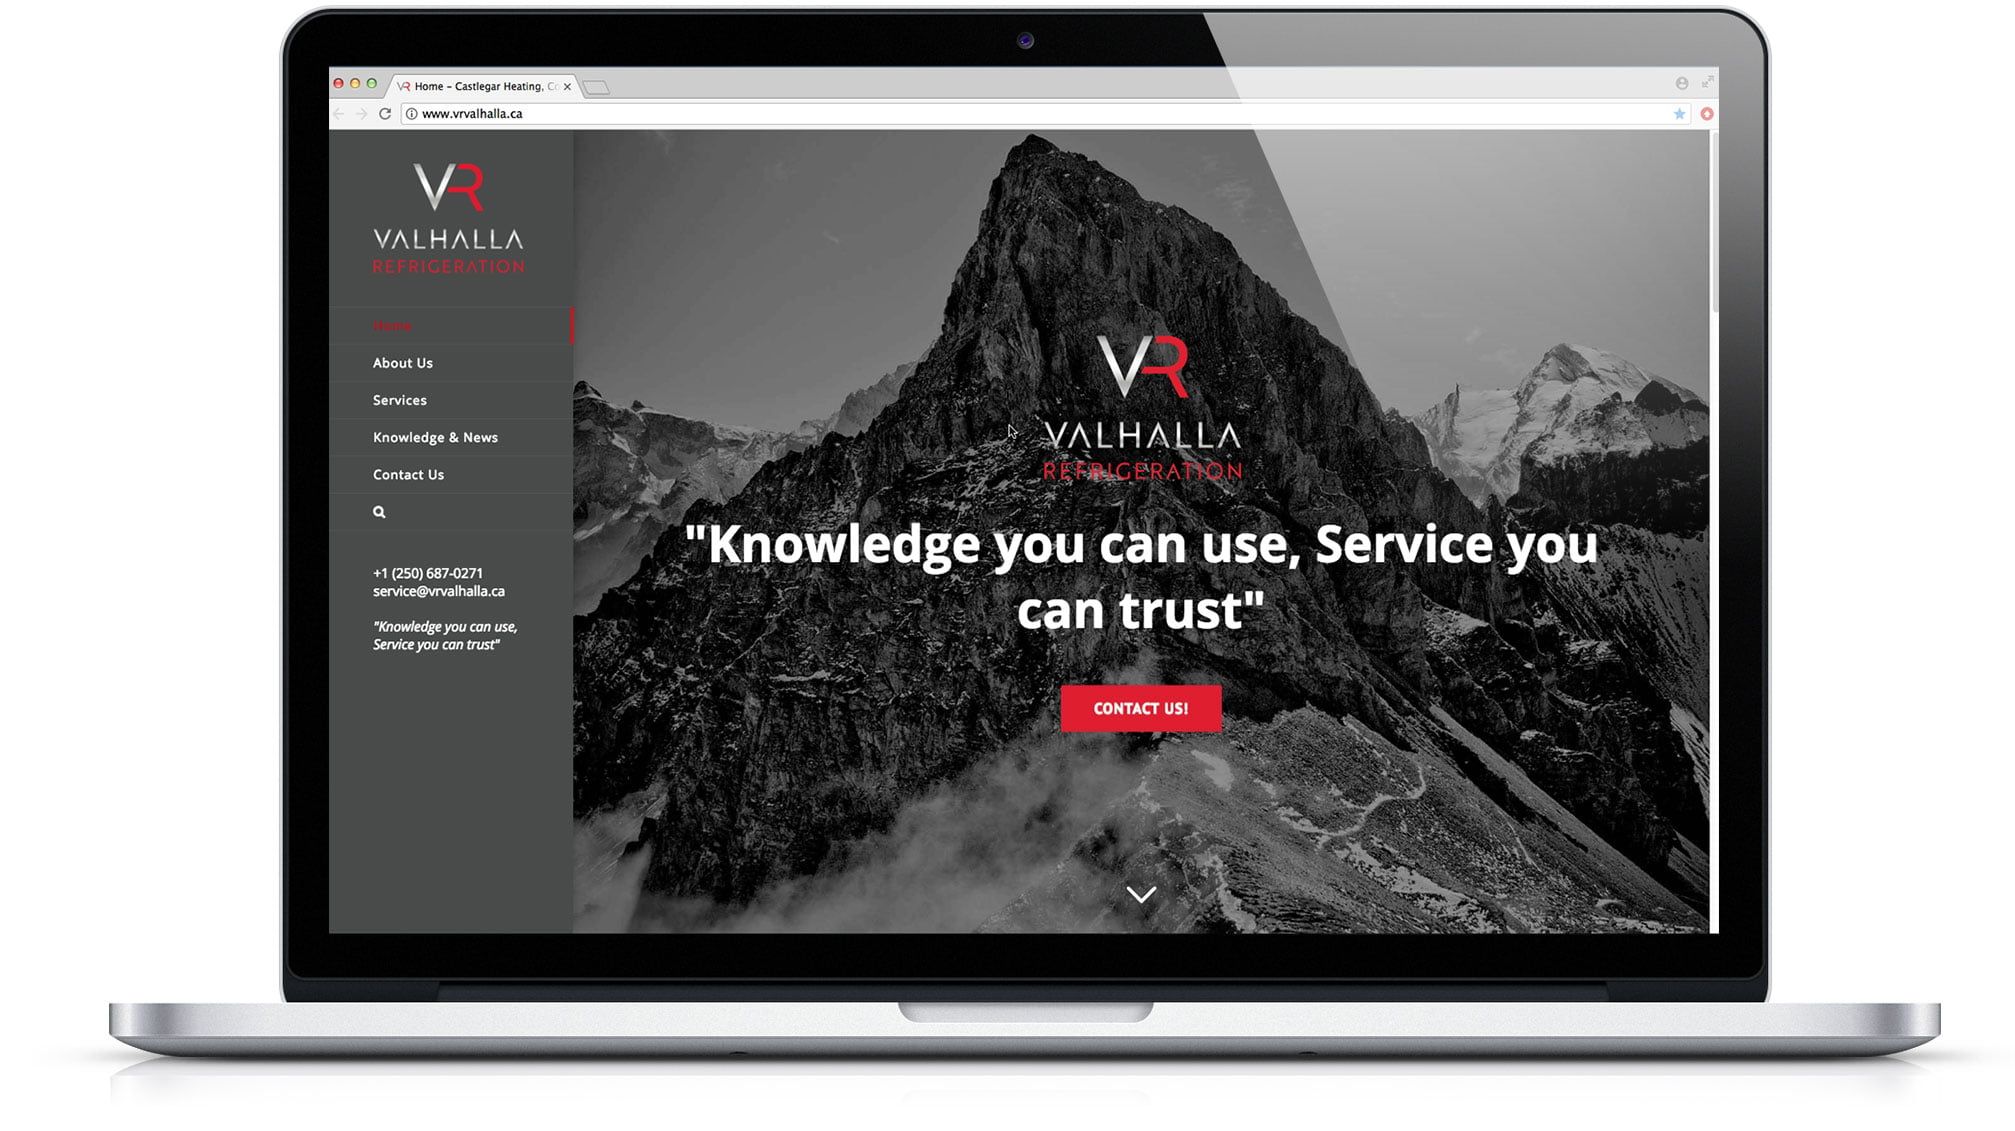 Valhalla Refrigeration in Castlegar BC, the West Kootenays was provided with a mobile responsive WordPress website